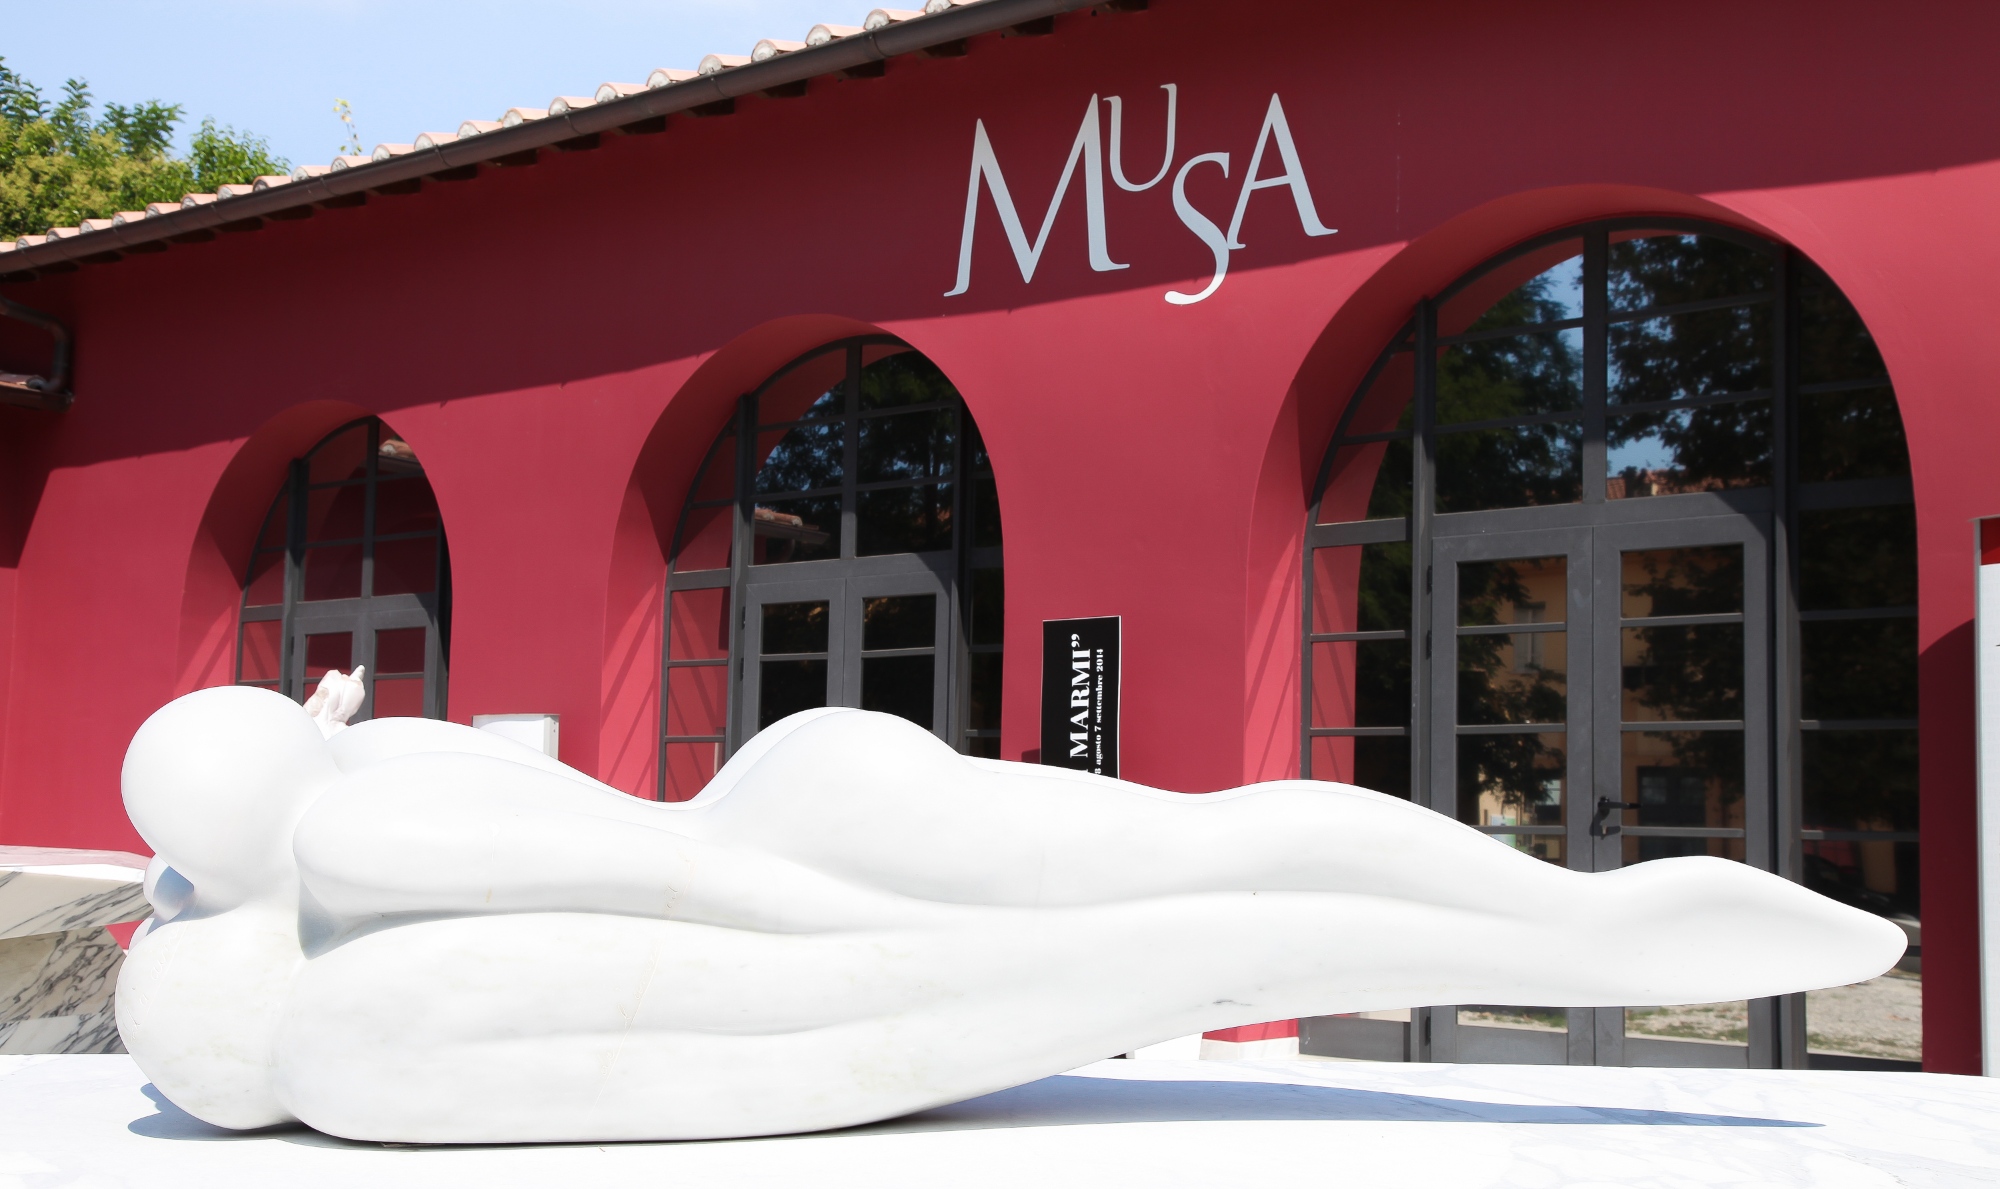 MuSA exterior with white statue